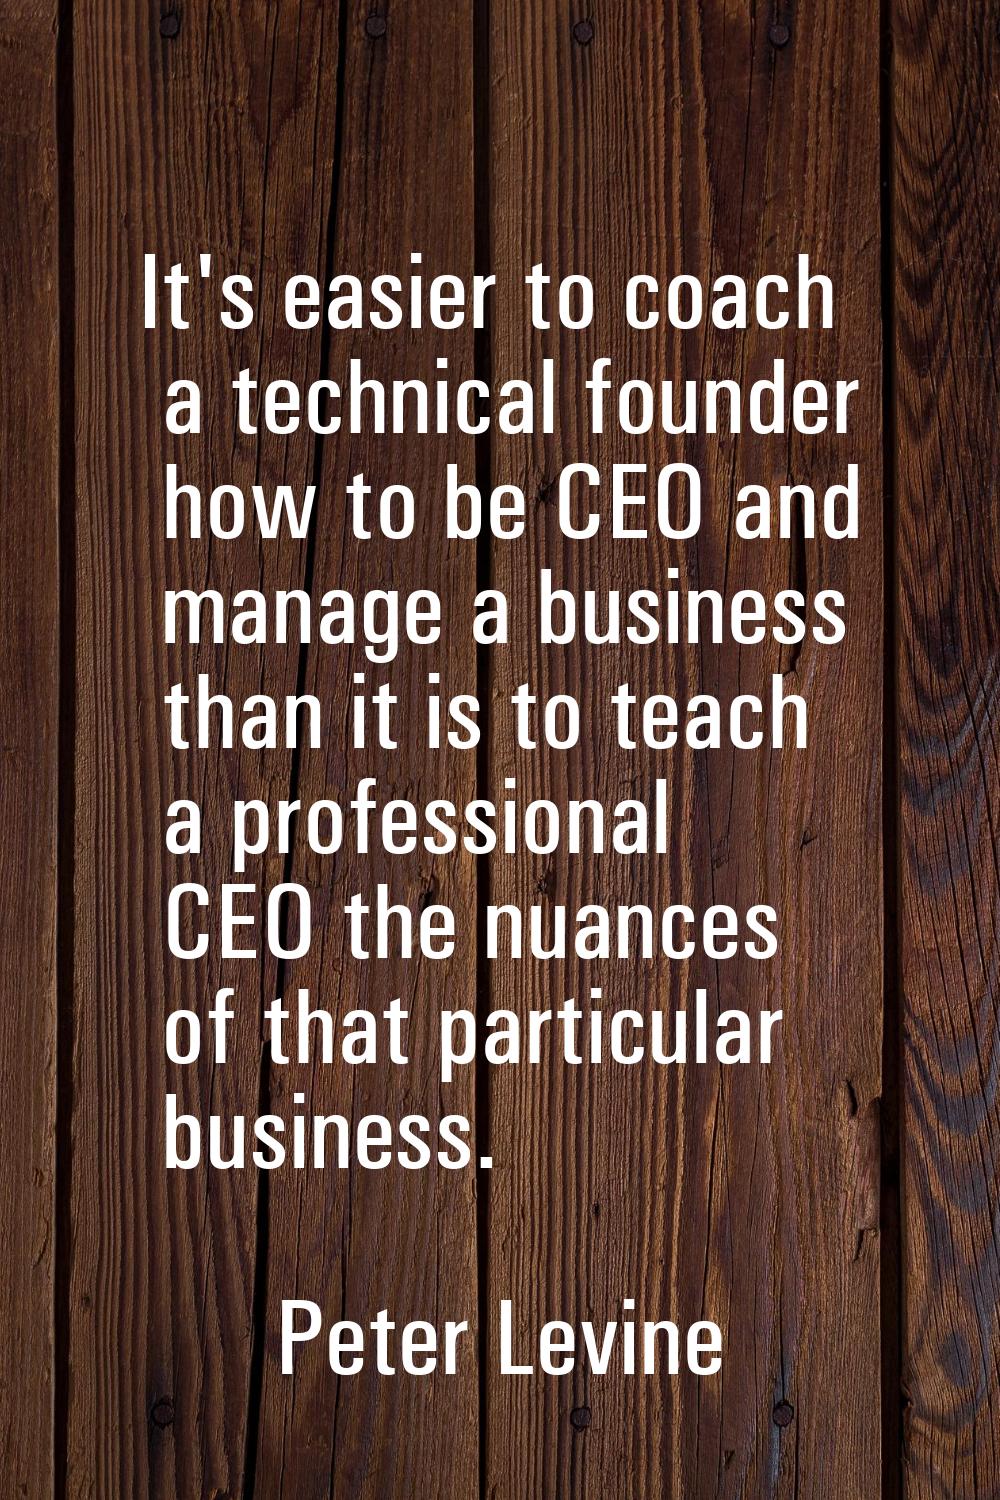 It's easier to coach a technical founder how to be CEO and manage a business than it is to teach a 